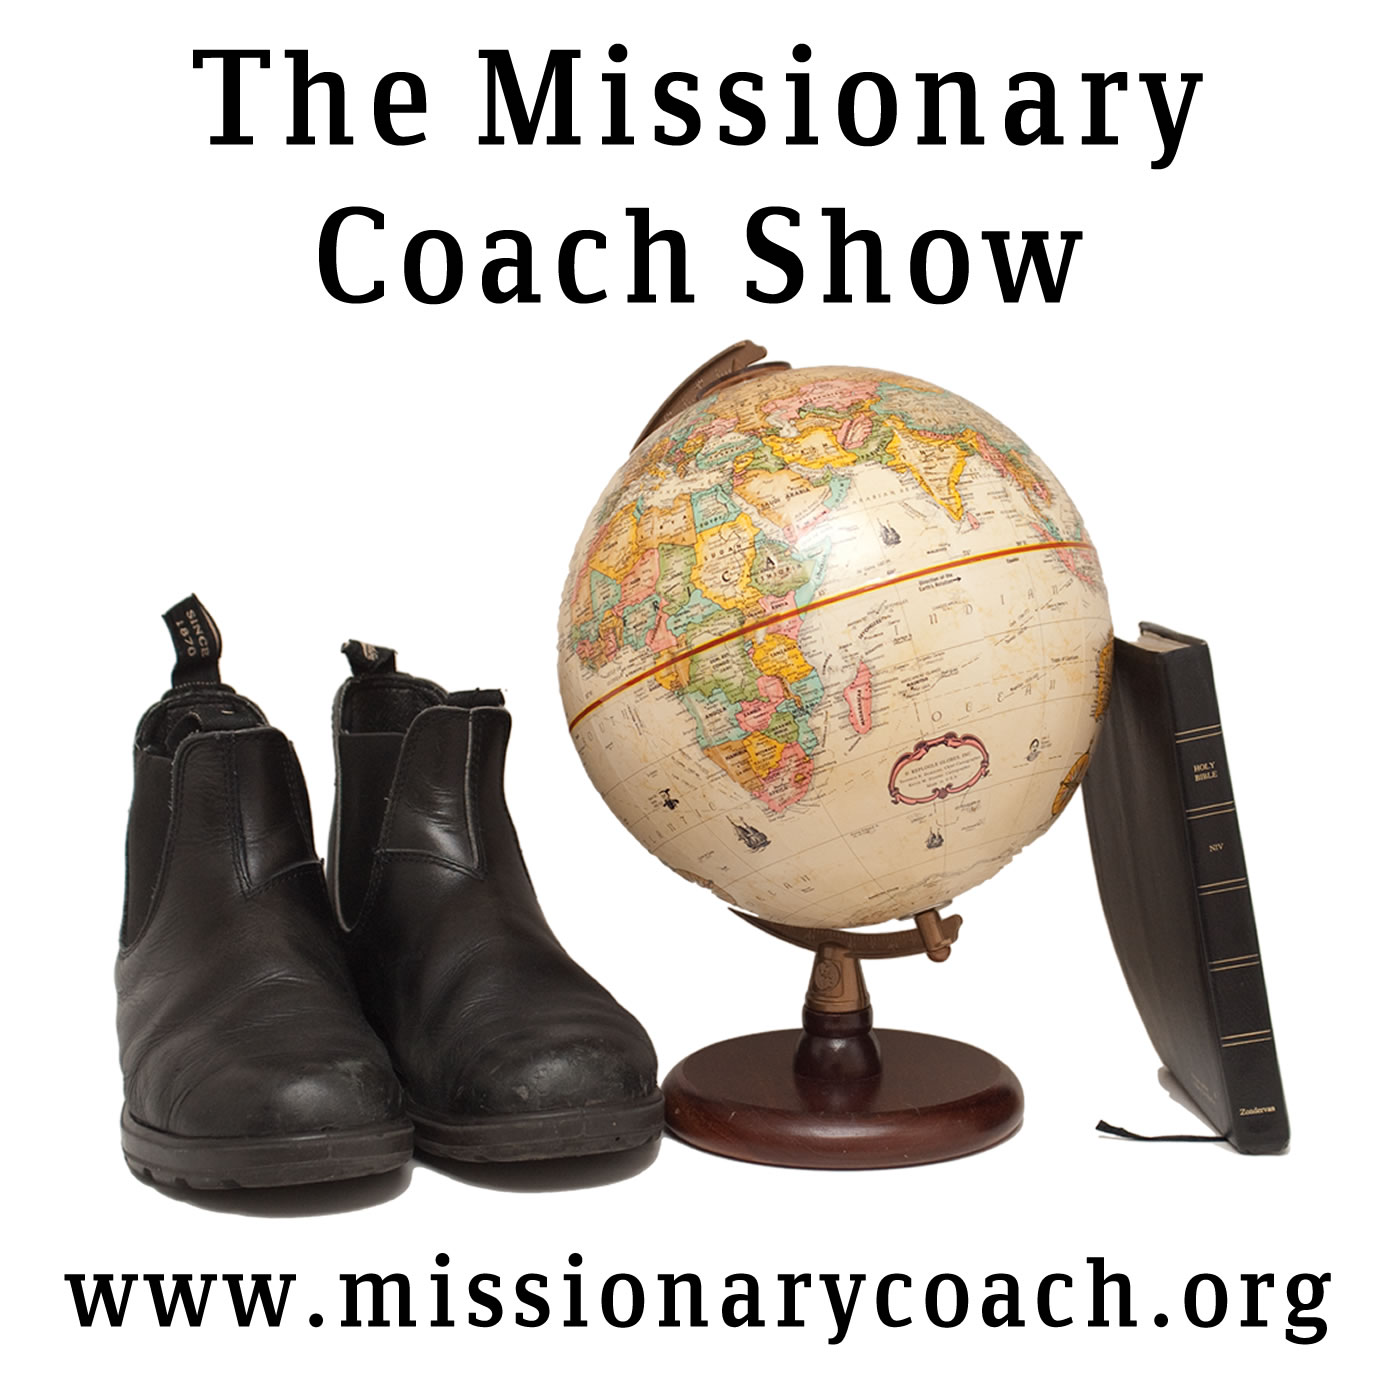 The Missionary Coach Show with Bill Hutchison